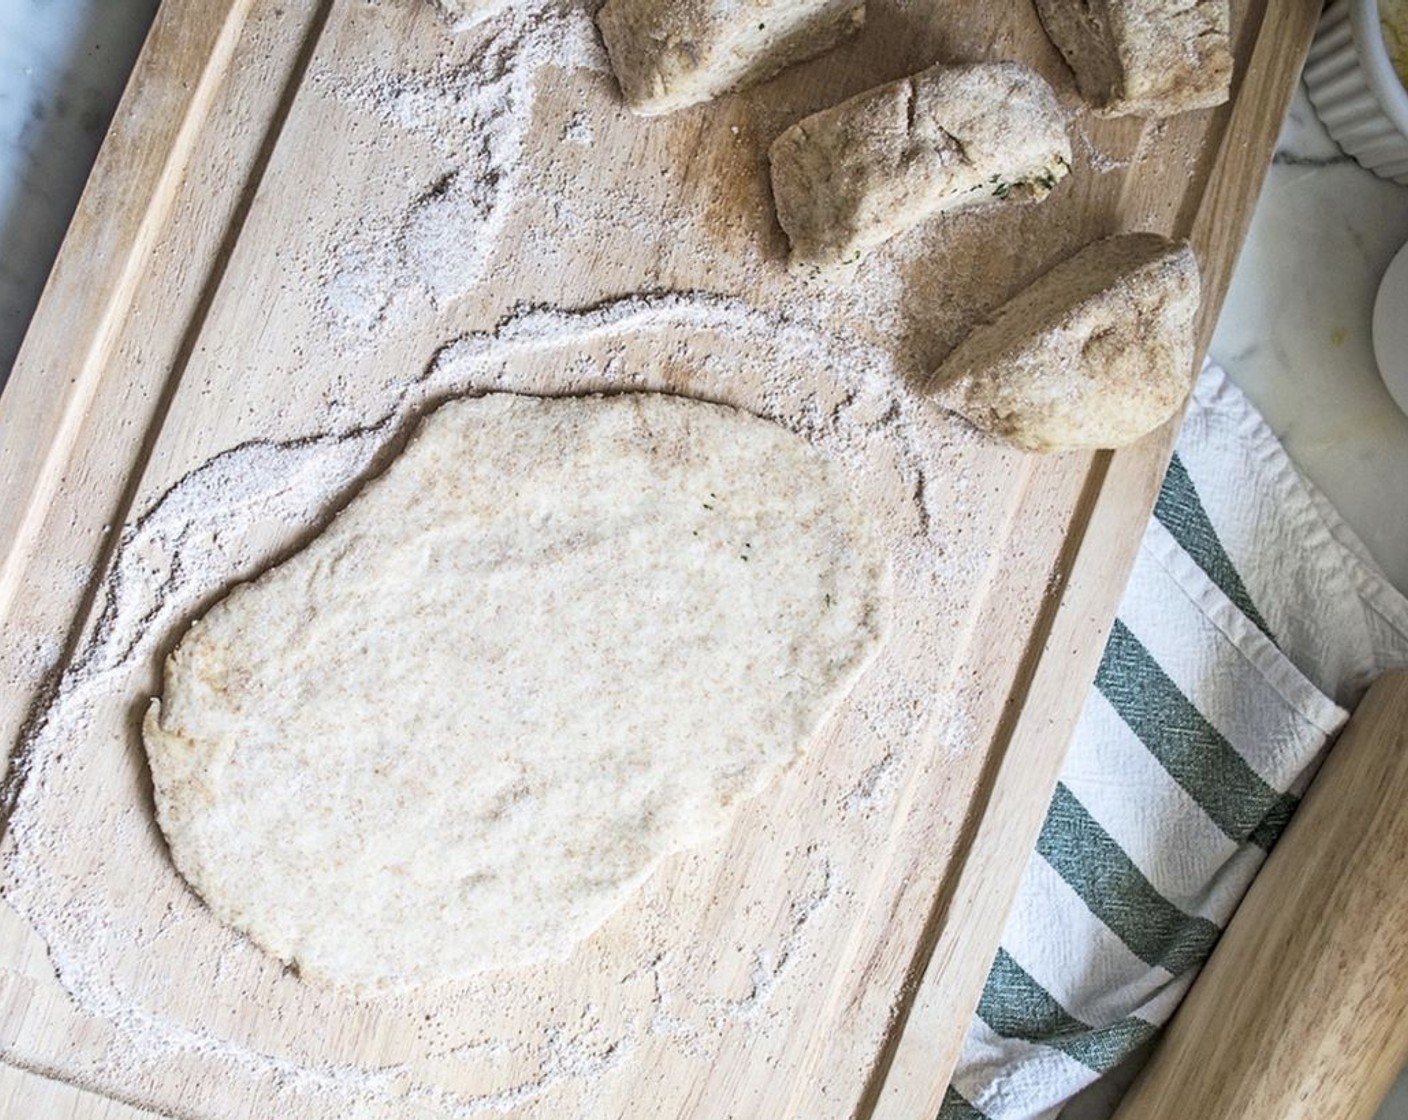 step 7 Roll each into a flat oval shape, approximately 1/4-inch thick. Allow baking sheet to get hot in the oven while you roll out the flatbread.